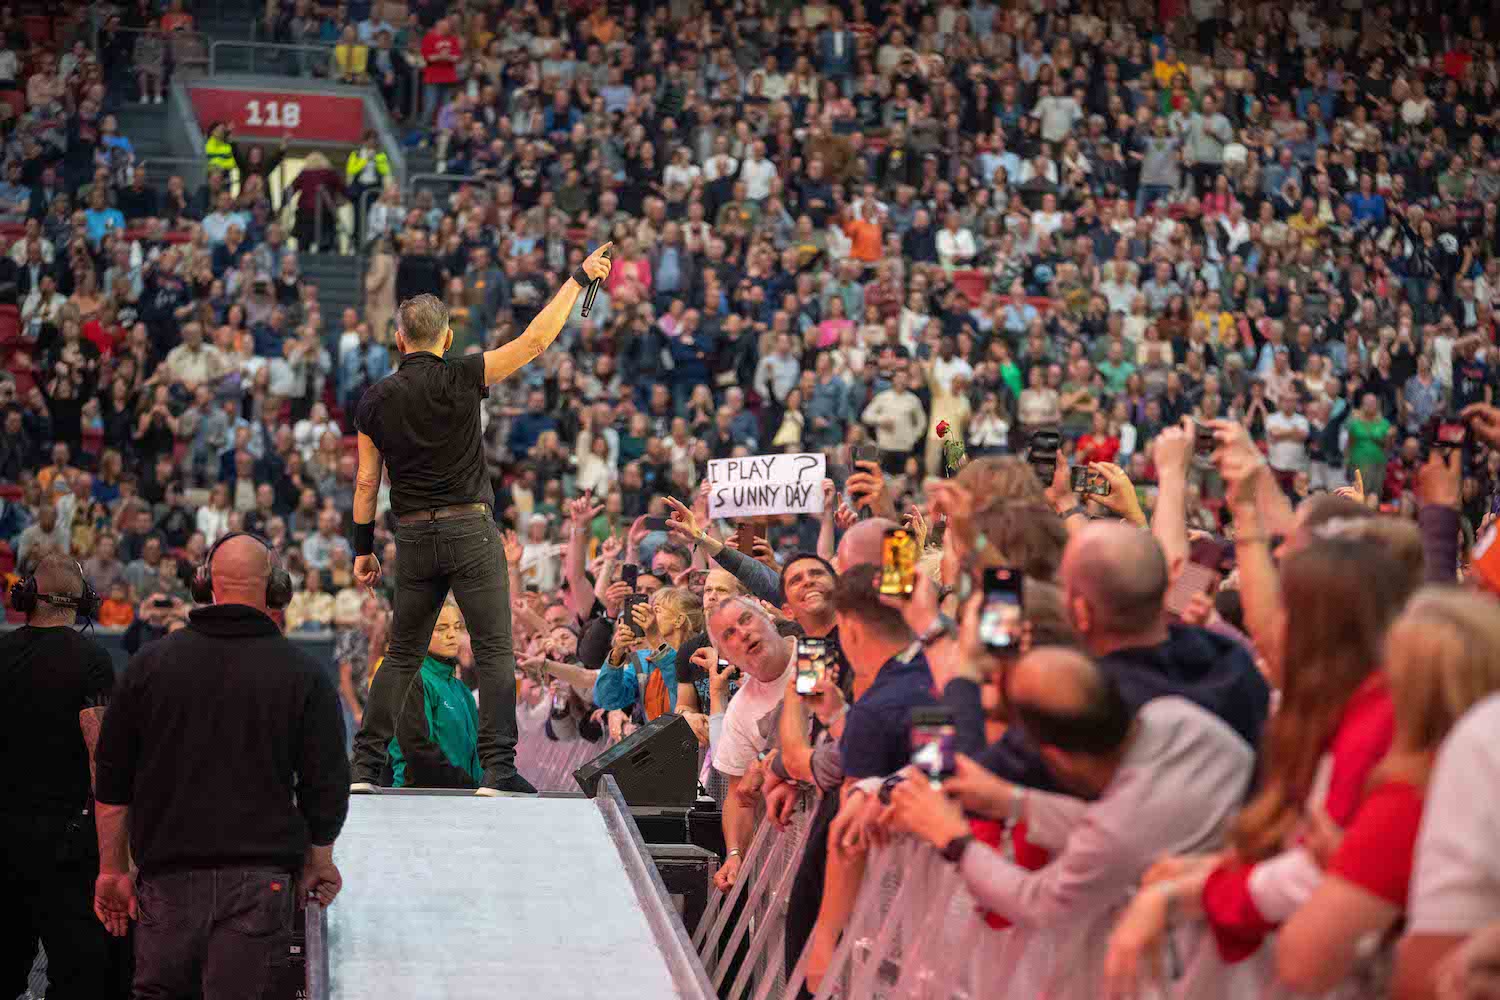 Bruce Springsteen & E Street Band at Johan Cruijff ArenA, Amsterdam, The Netherlands on May 25, 2023.